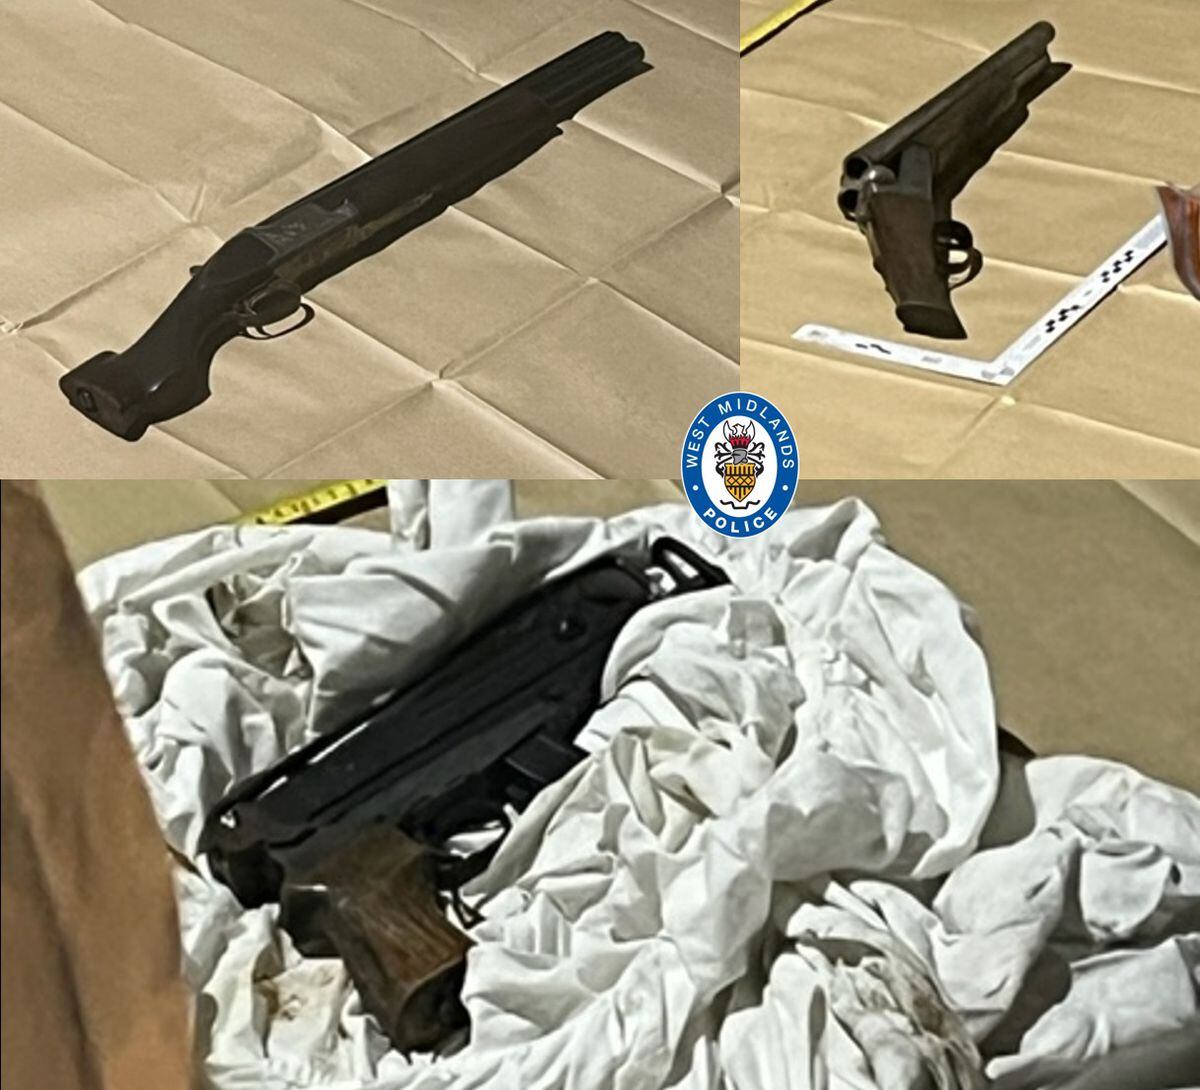 The three guns found in the wall. 